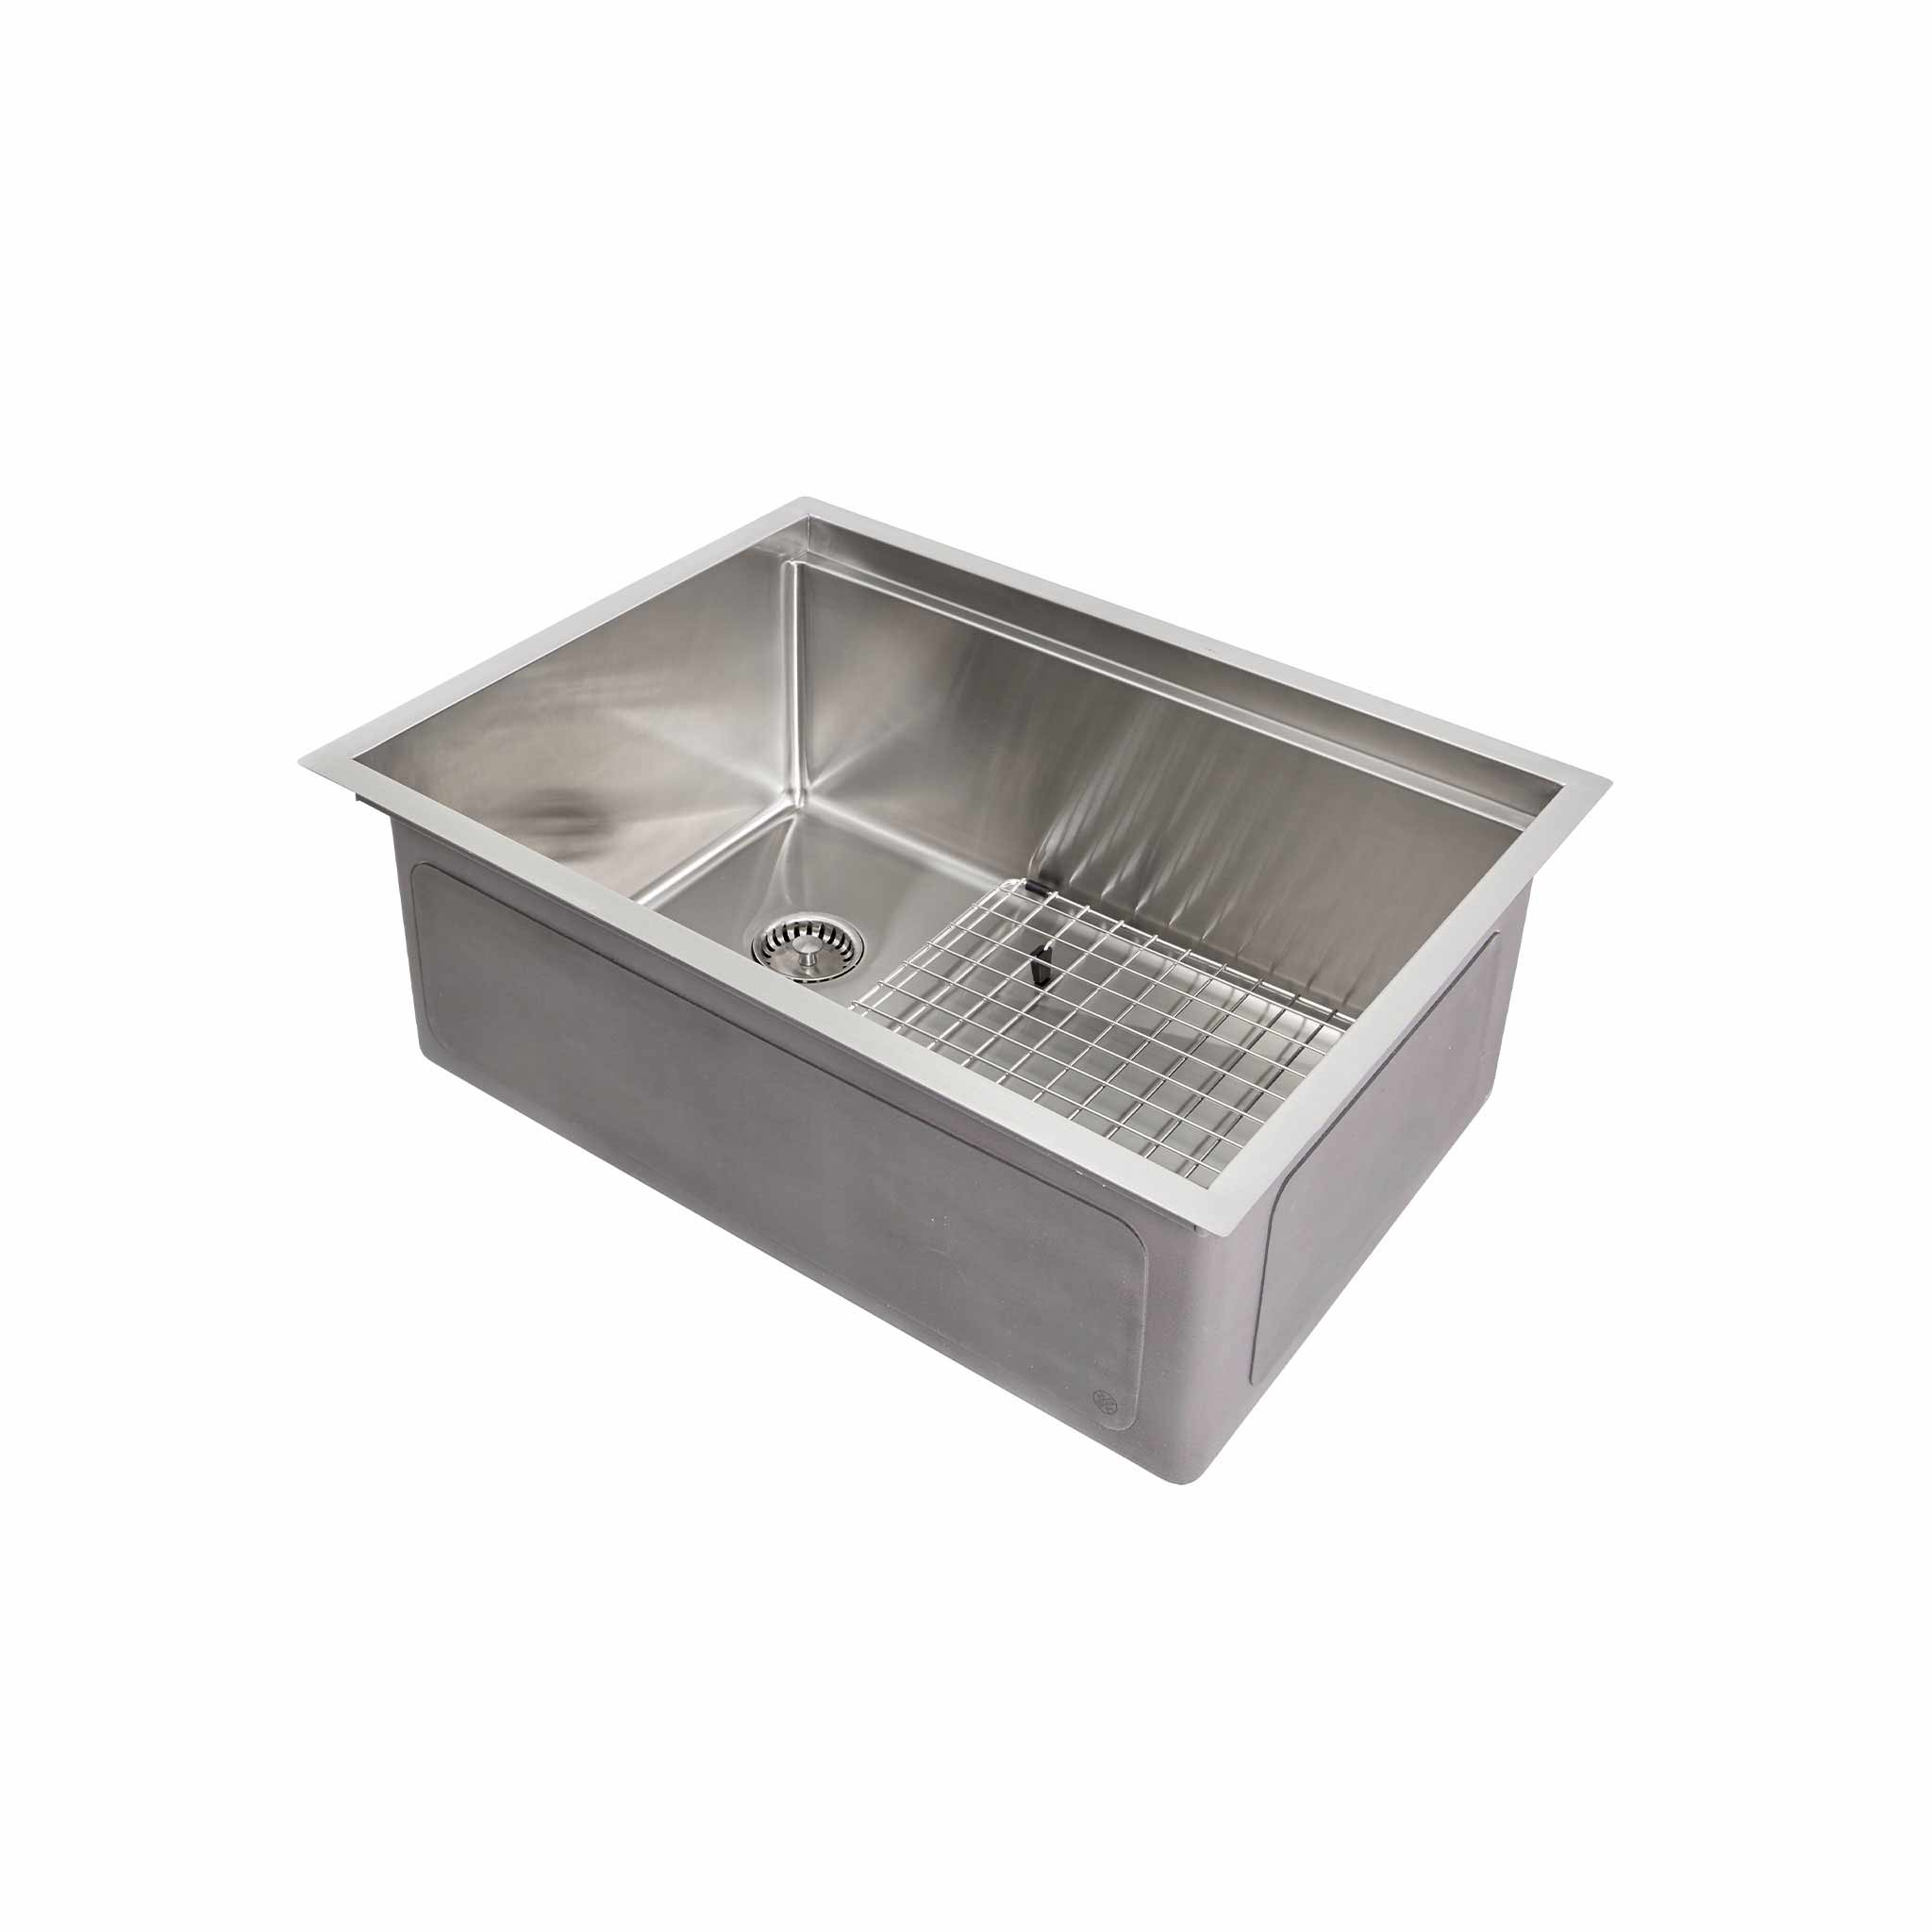 26" Create Good Sink workstation sink with the basin protecting stainless steel grid.